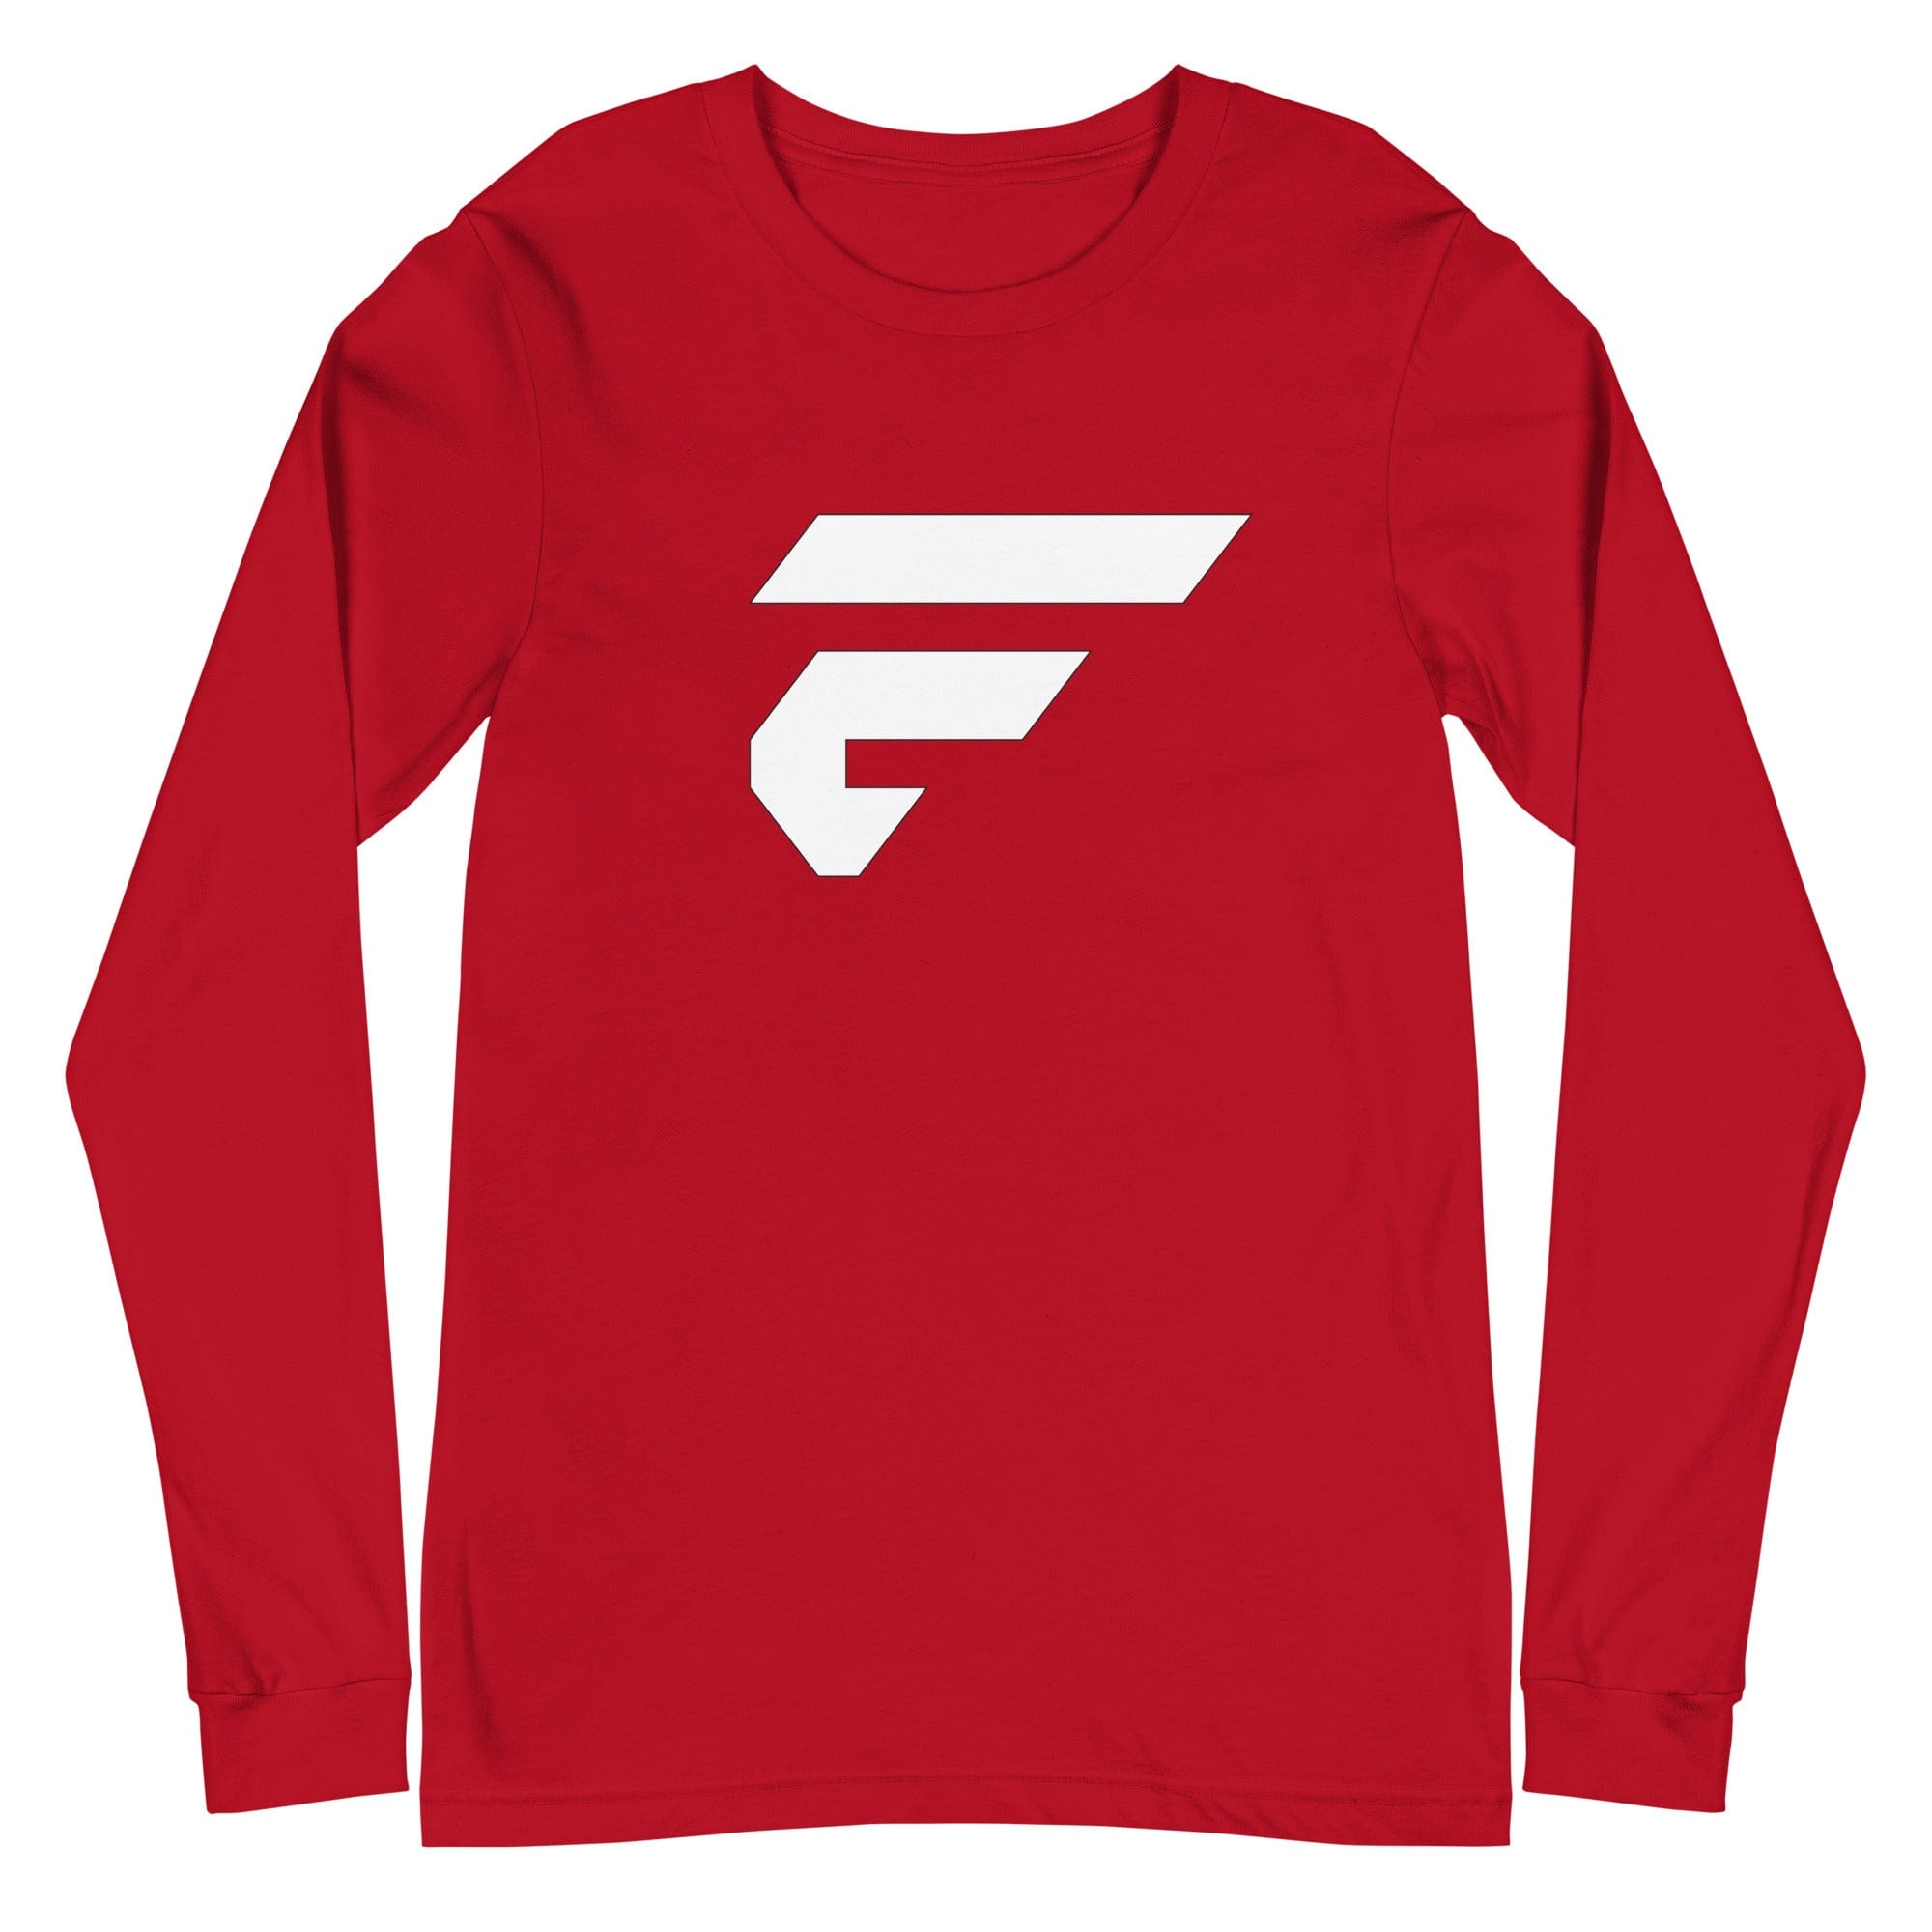 Red unisex cotton longsleeve shirt with Fire Cornhole F logo in white